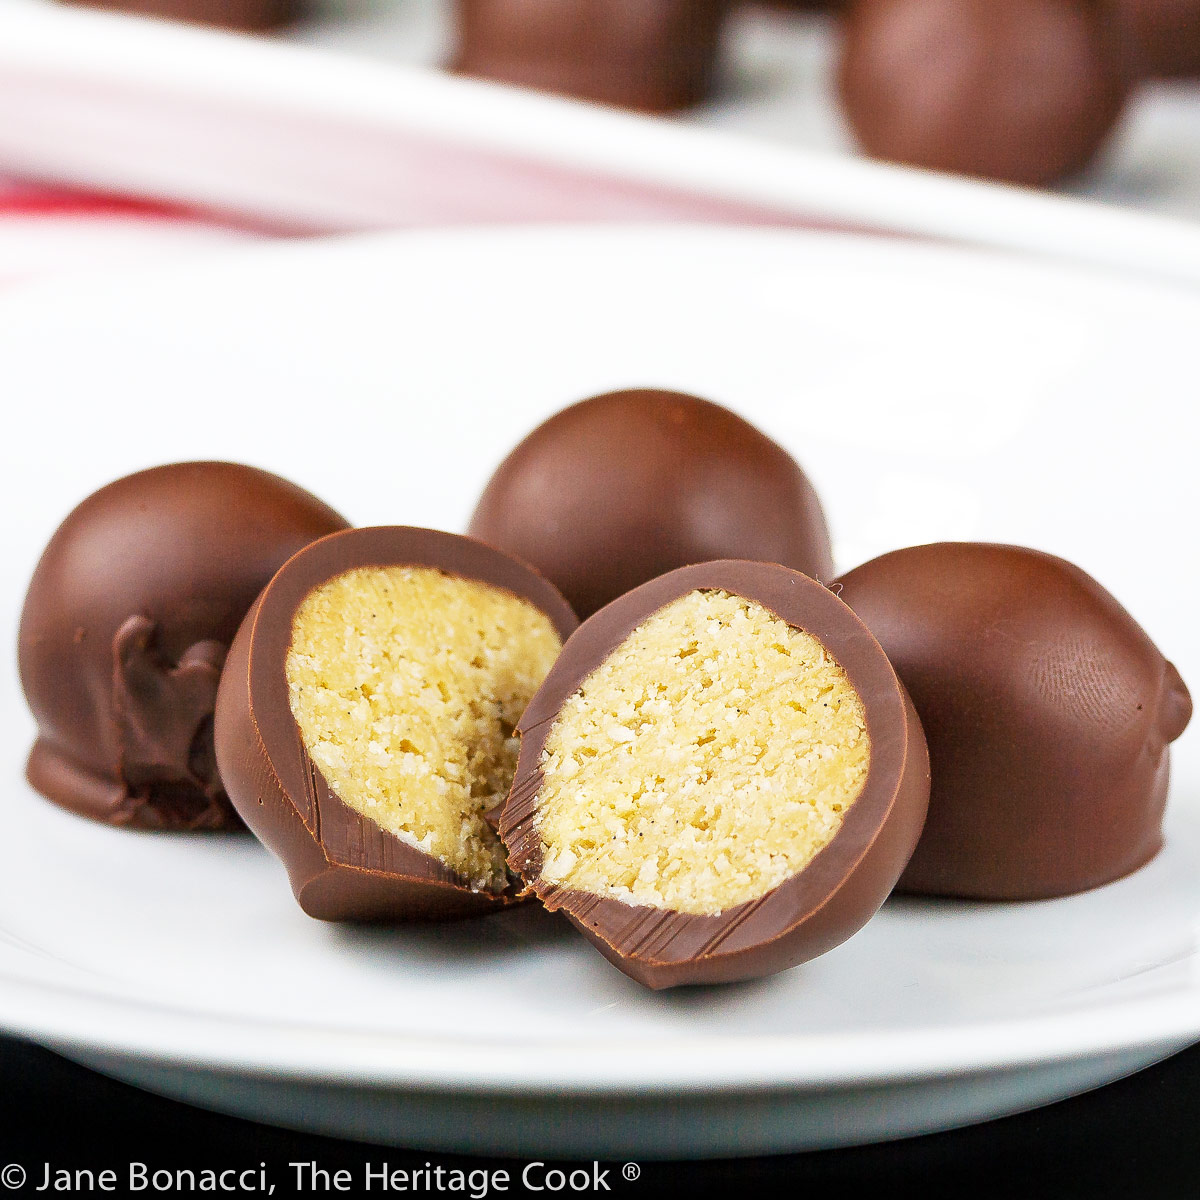 Chocolate Peanut Butter Truffles are balls of sweetened peanut butter filling coated in dark chocolate, some cut open to show the centers, on a white tray or plate on top of red striped towels © 2023 Jane Bonacci, The Heritage Cook.